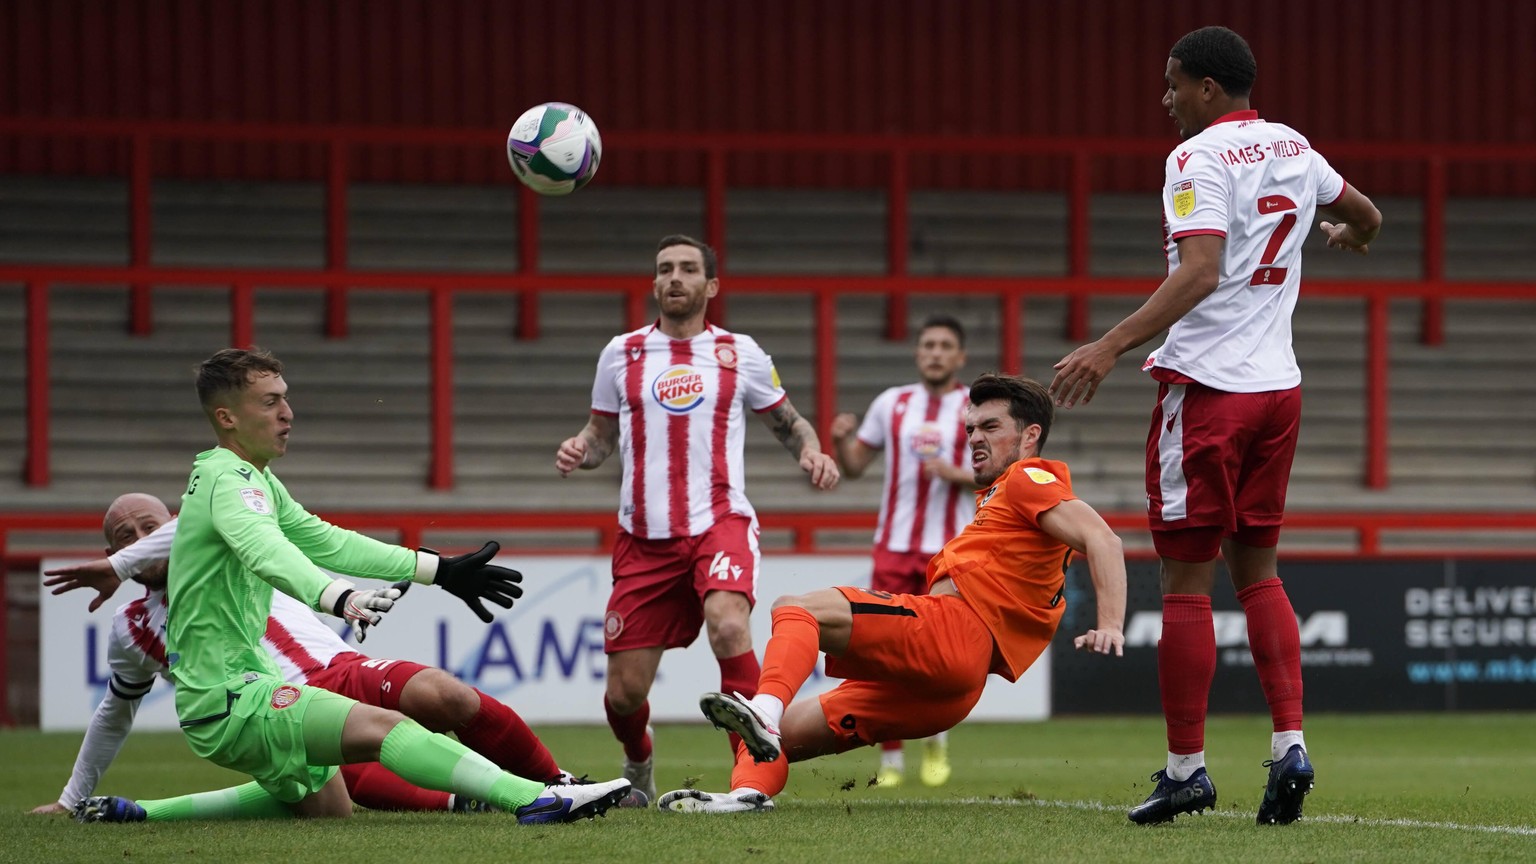 Stevenage v Portsmouth EFL Cup 29/08/2020. Gareth Evans of Portsmouth in action during the EFL Cup match between Stevenage and Portsmouth at the Lamex Stadium, Stevenage, England on 29 August 2020. Ed ...